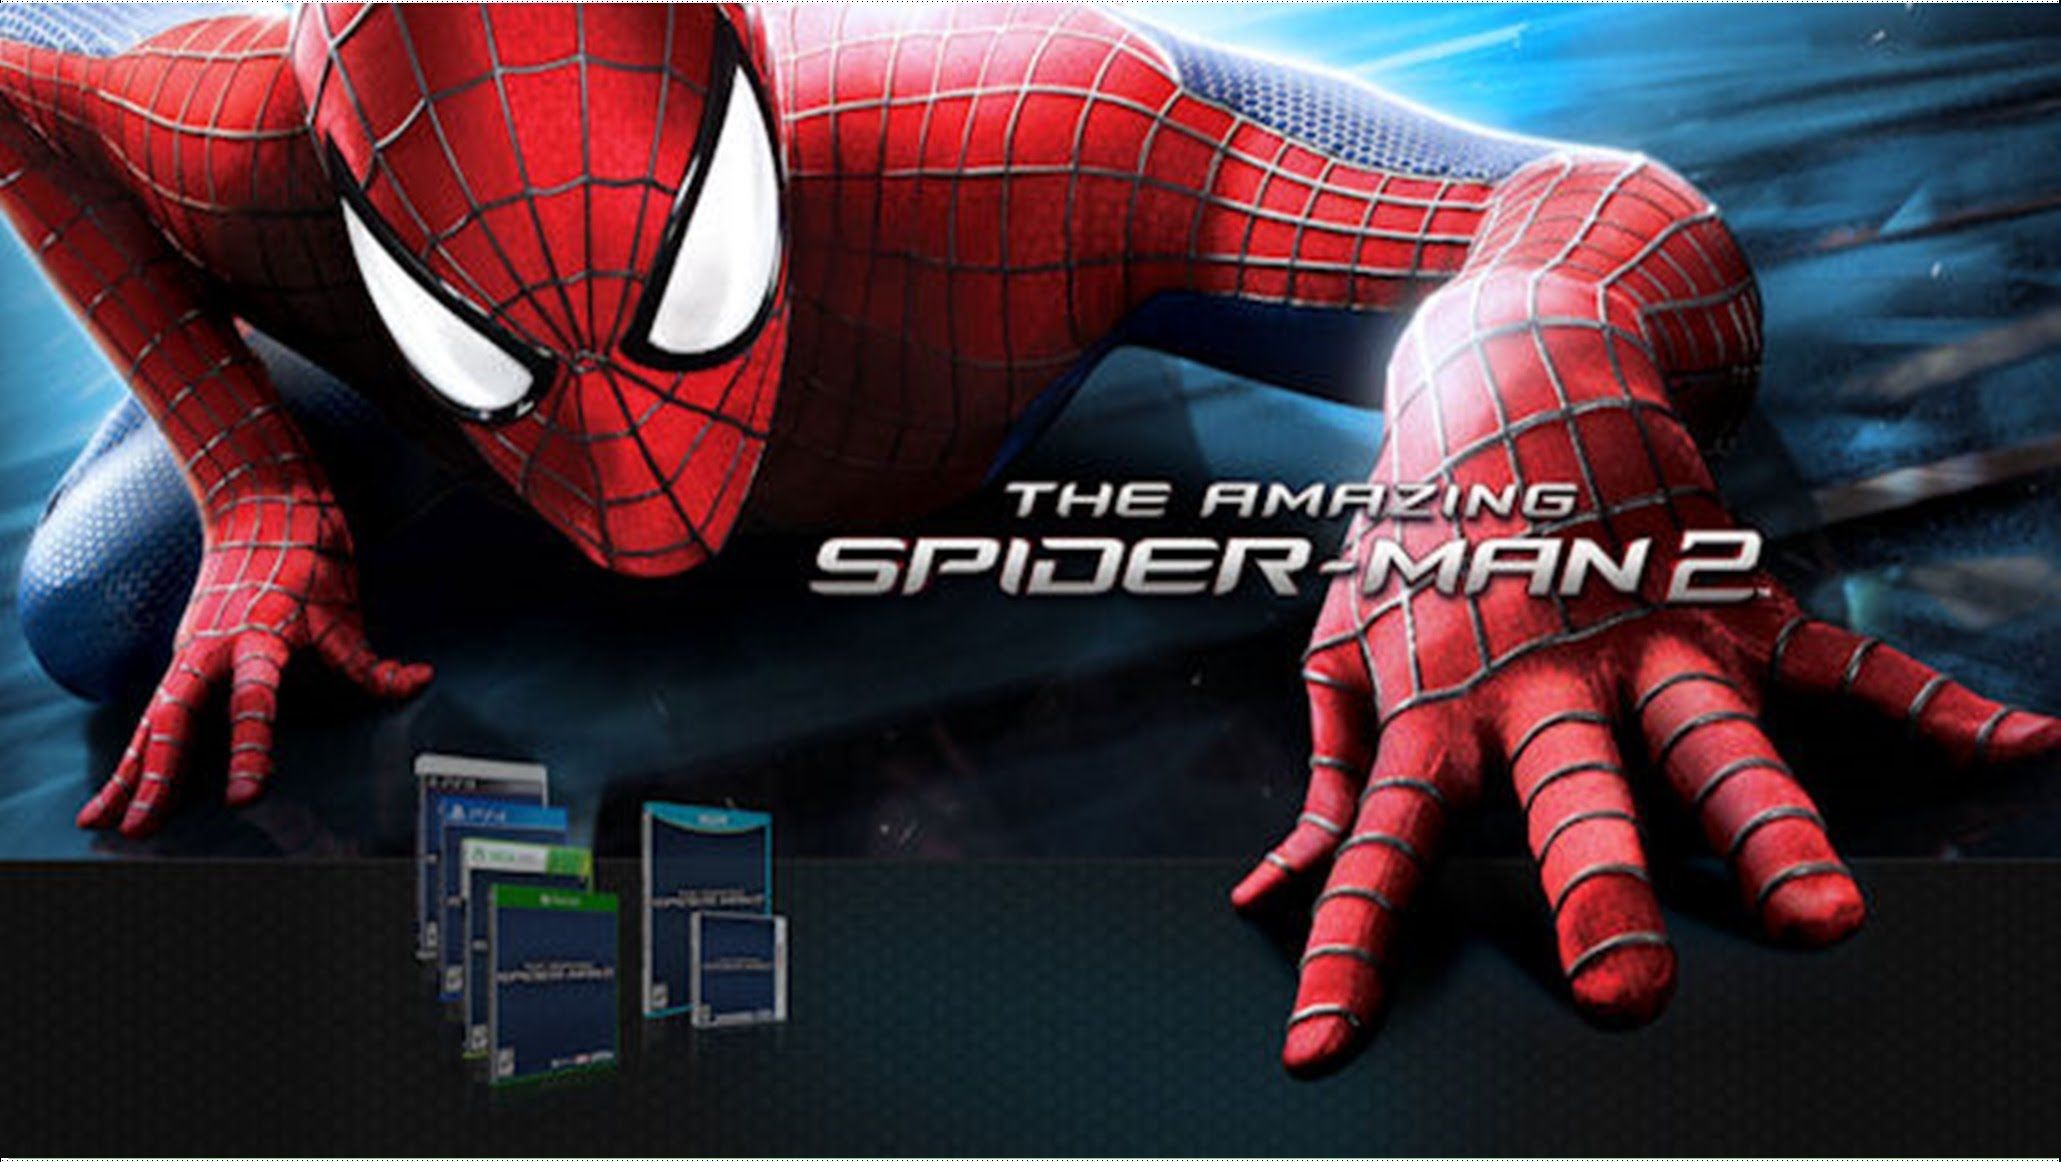 The amazing spider man 2 wallpaper hd - My Free Wallpapers Hub